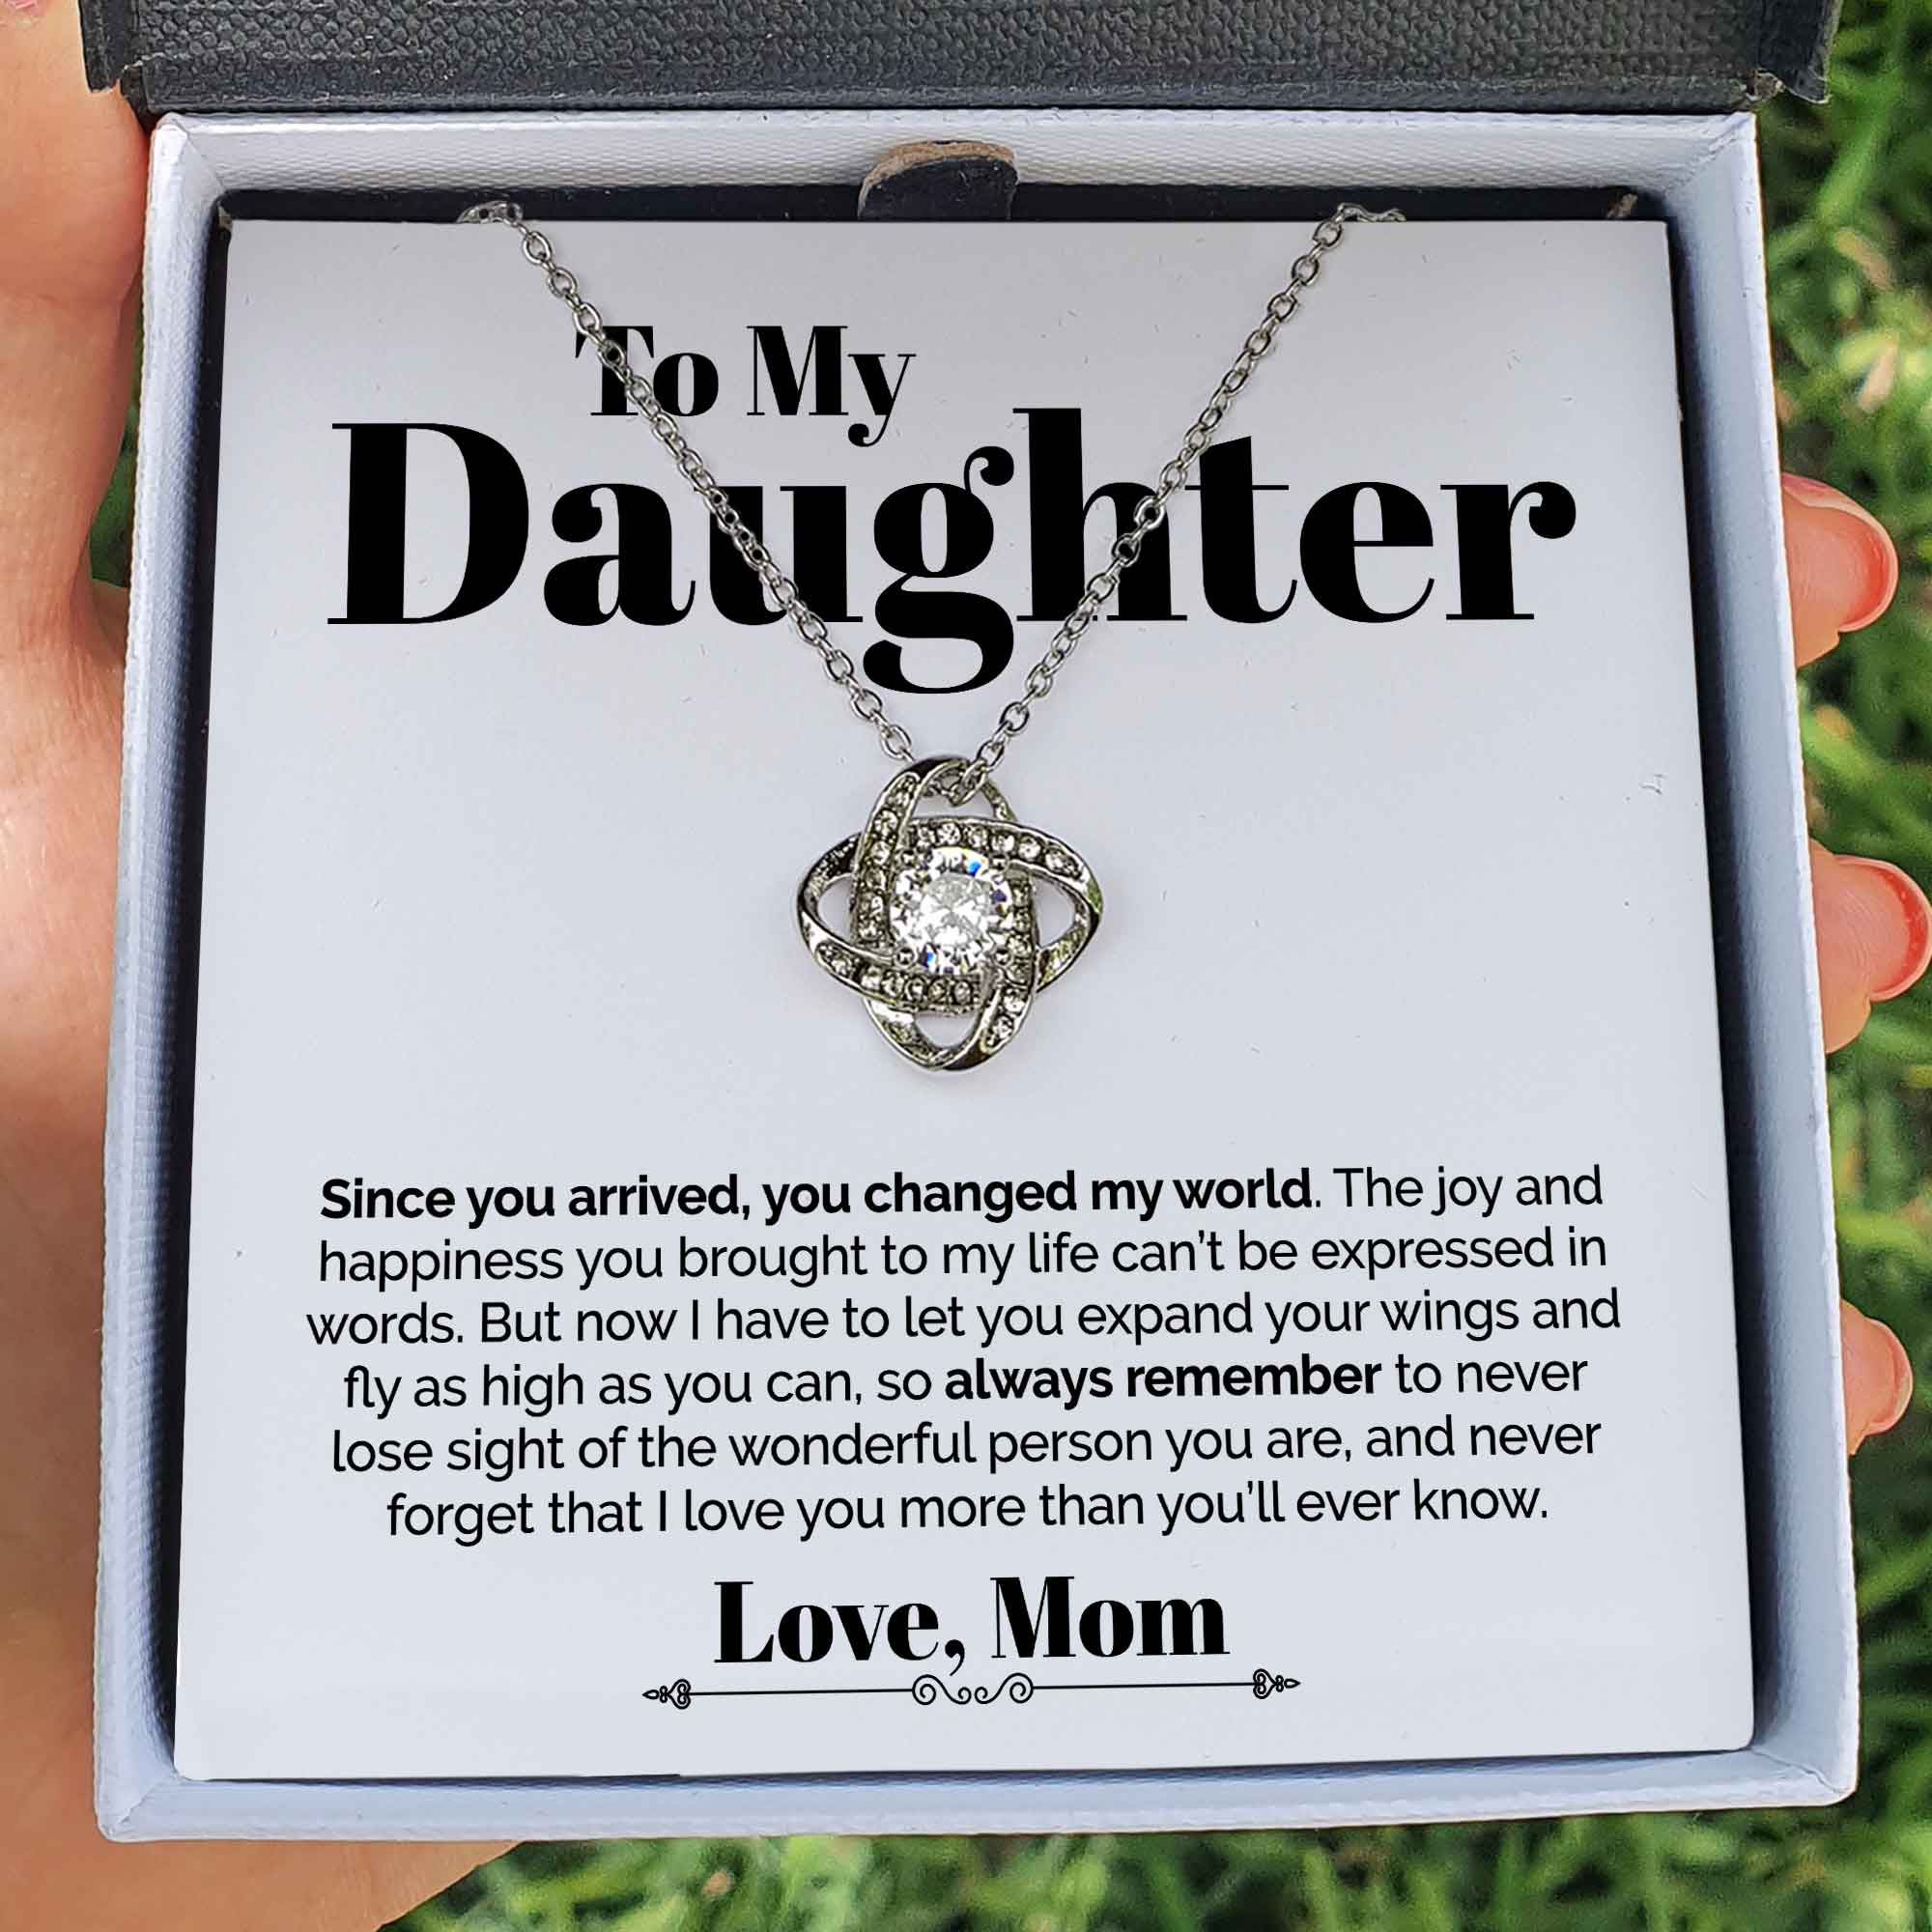 ShineOn Fulfillment Jewelry Standard Box To My Daughter - Since You Arrived - Love Knot Necklace